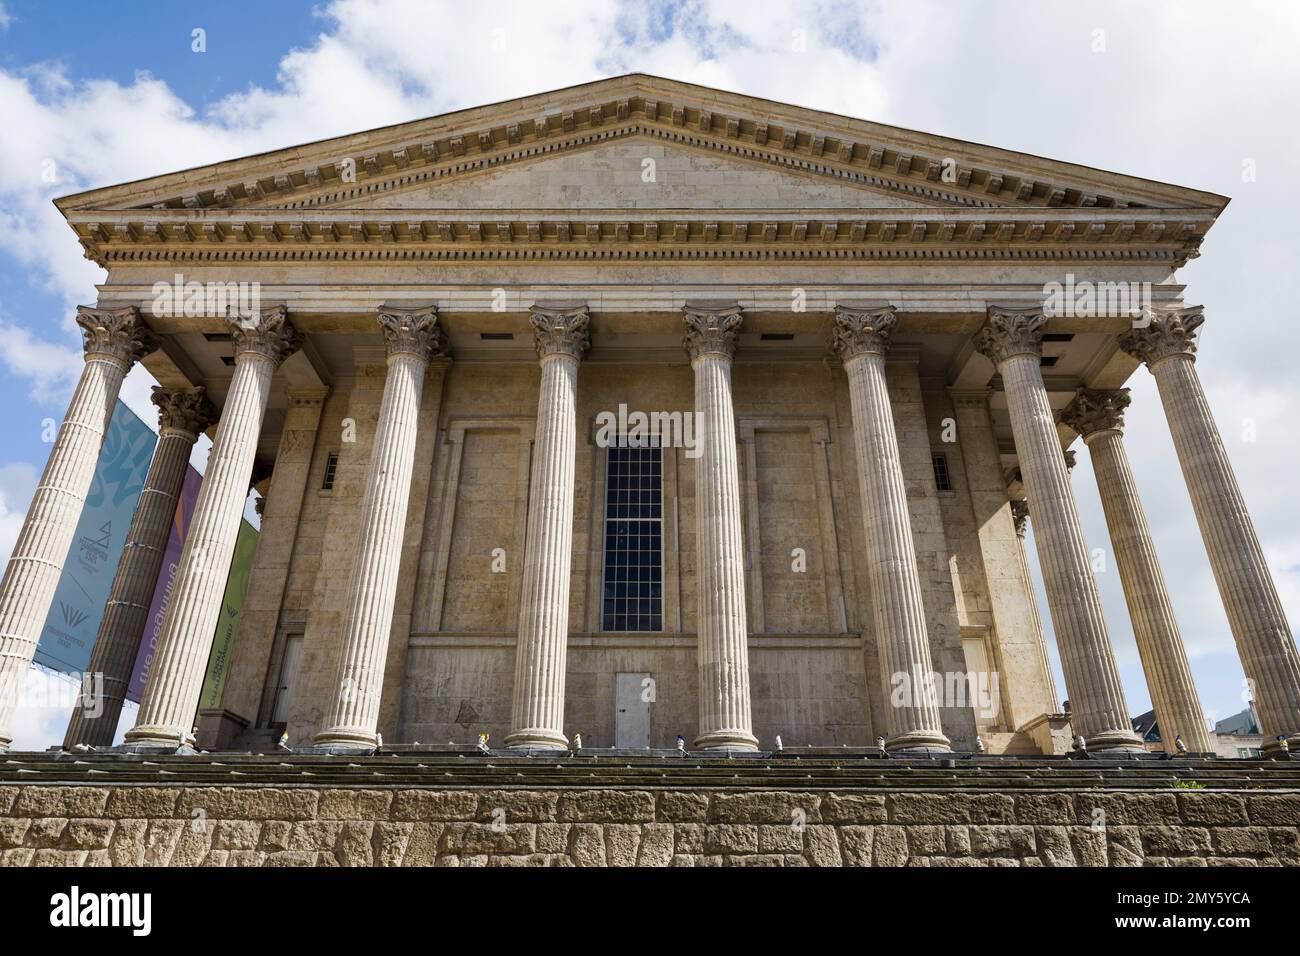 Birmingham Town Hall, UK, a neoclassical Corinthian temple, designed by Joseph Hansom and Edward Welch, 1832-34. Stock Photo